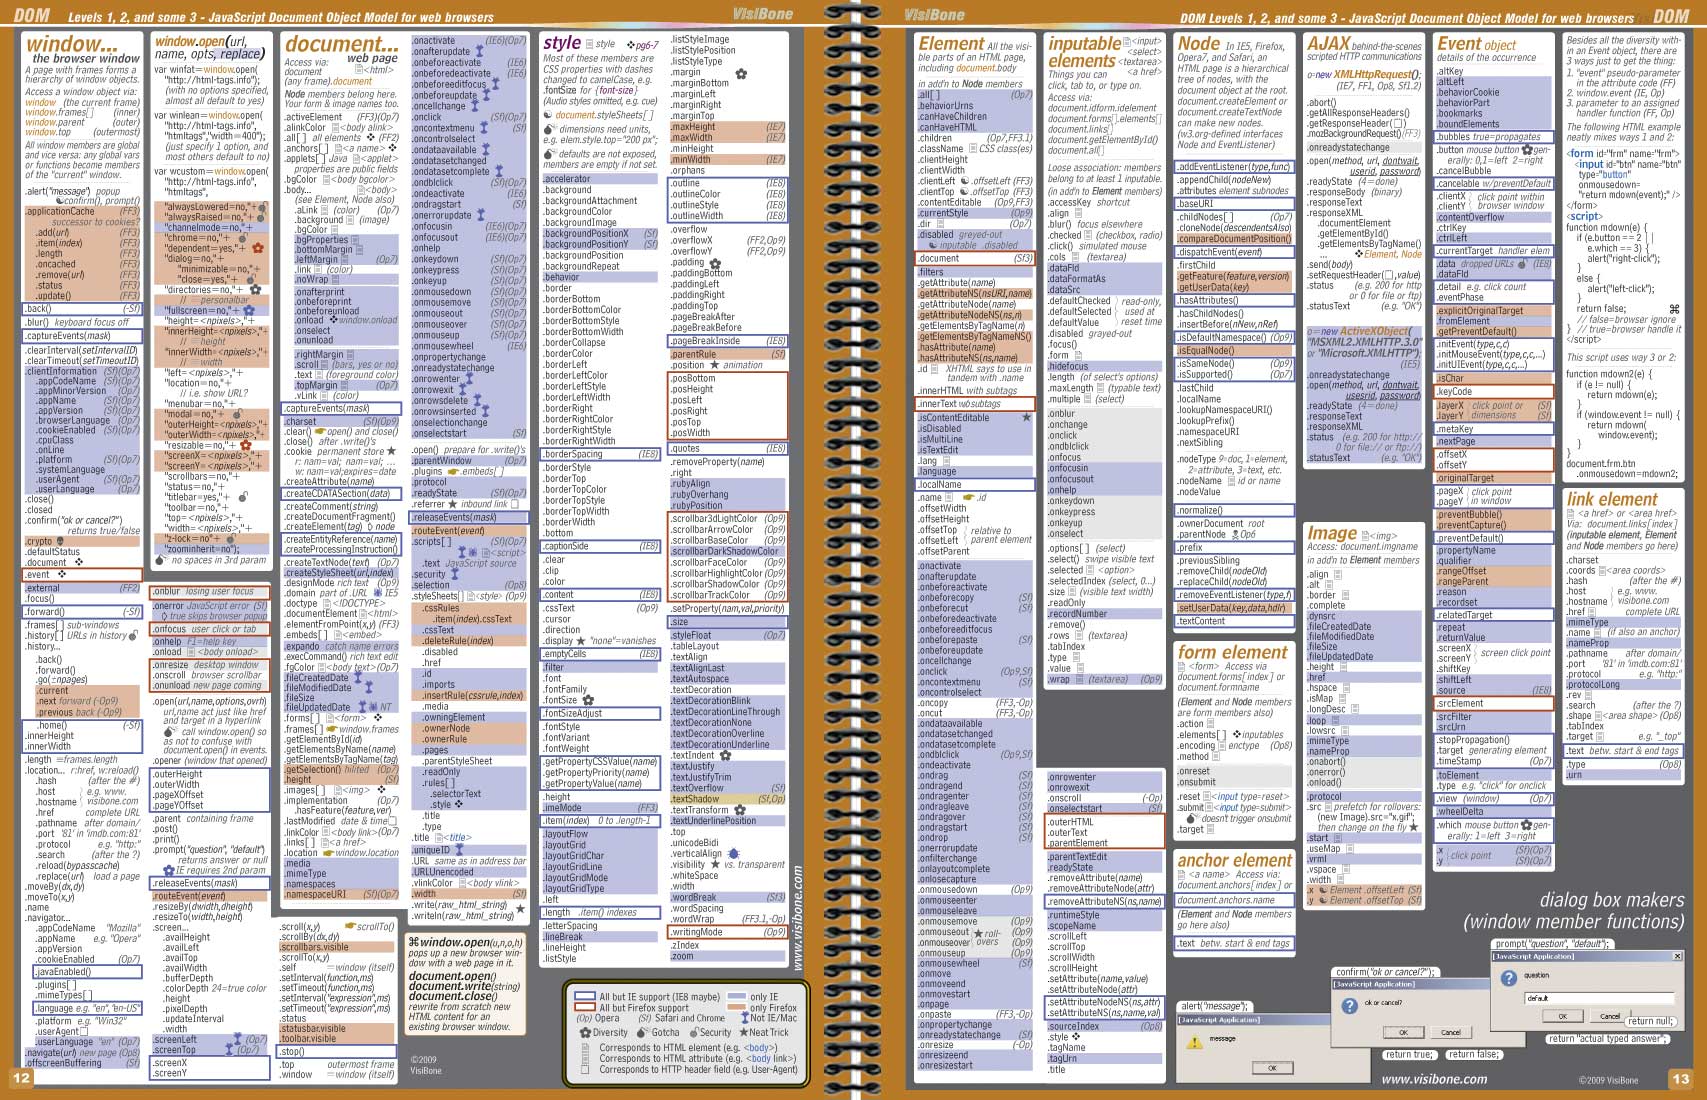 The VisiBone Everything Book Pages 12-13: DOM - Document Object Model